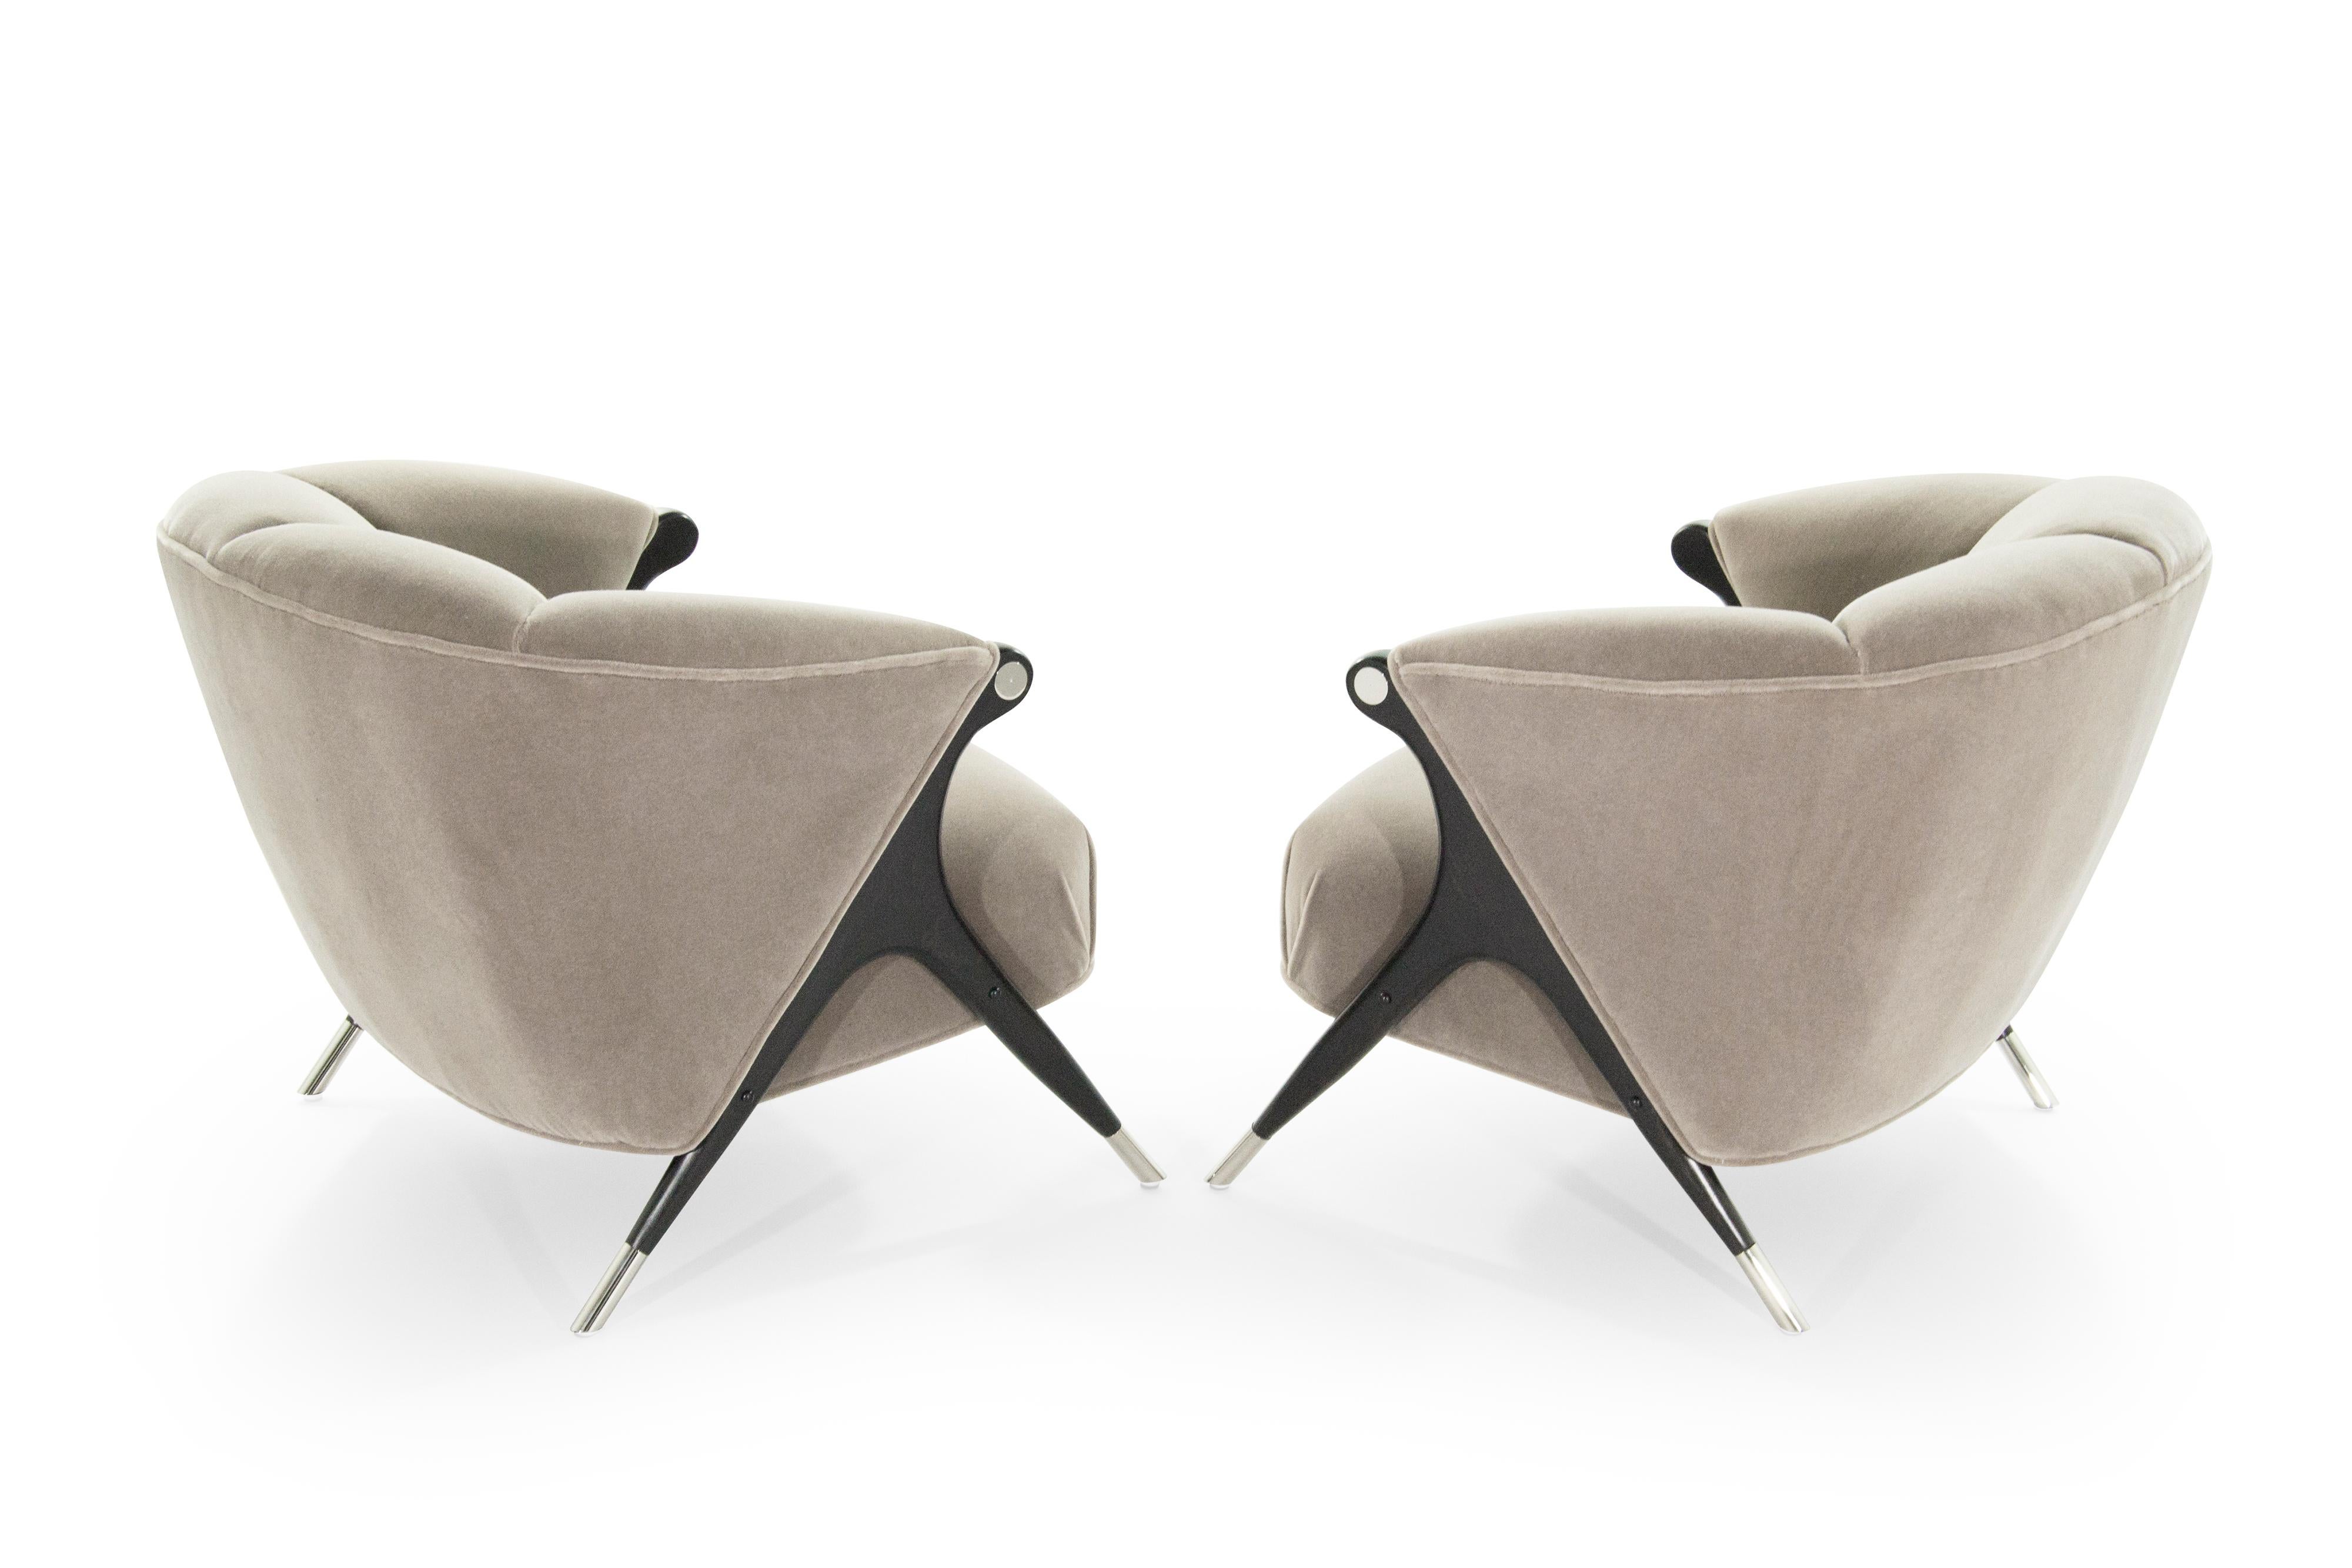 American Modernist Karpen Lounge Chairs in Taupe Mohair, 1950s